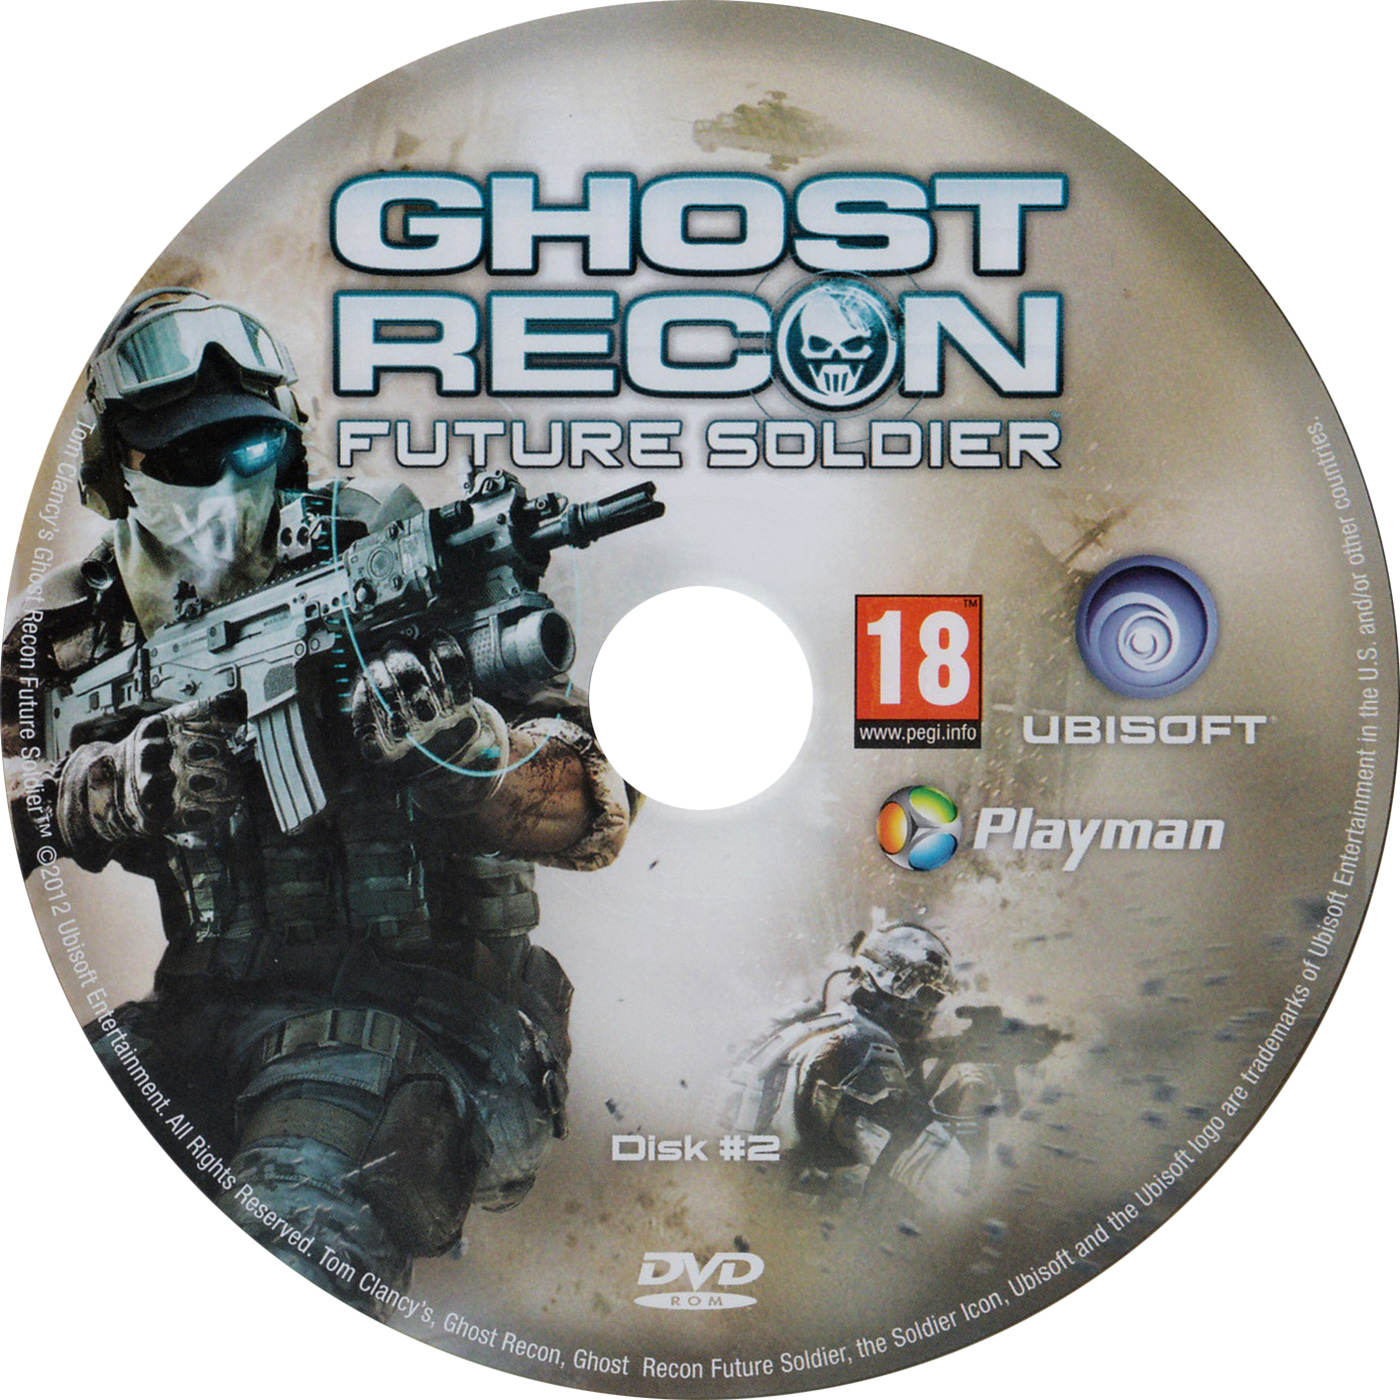 Ghost Recon: Future Soldier - CD obal 2